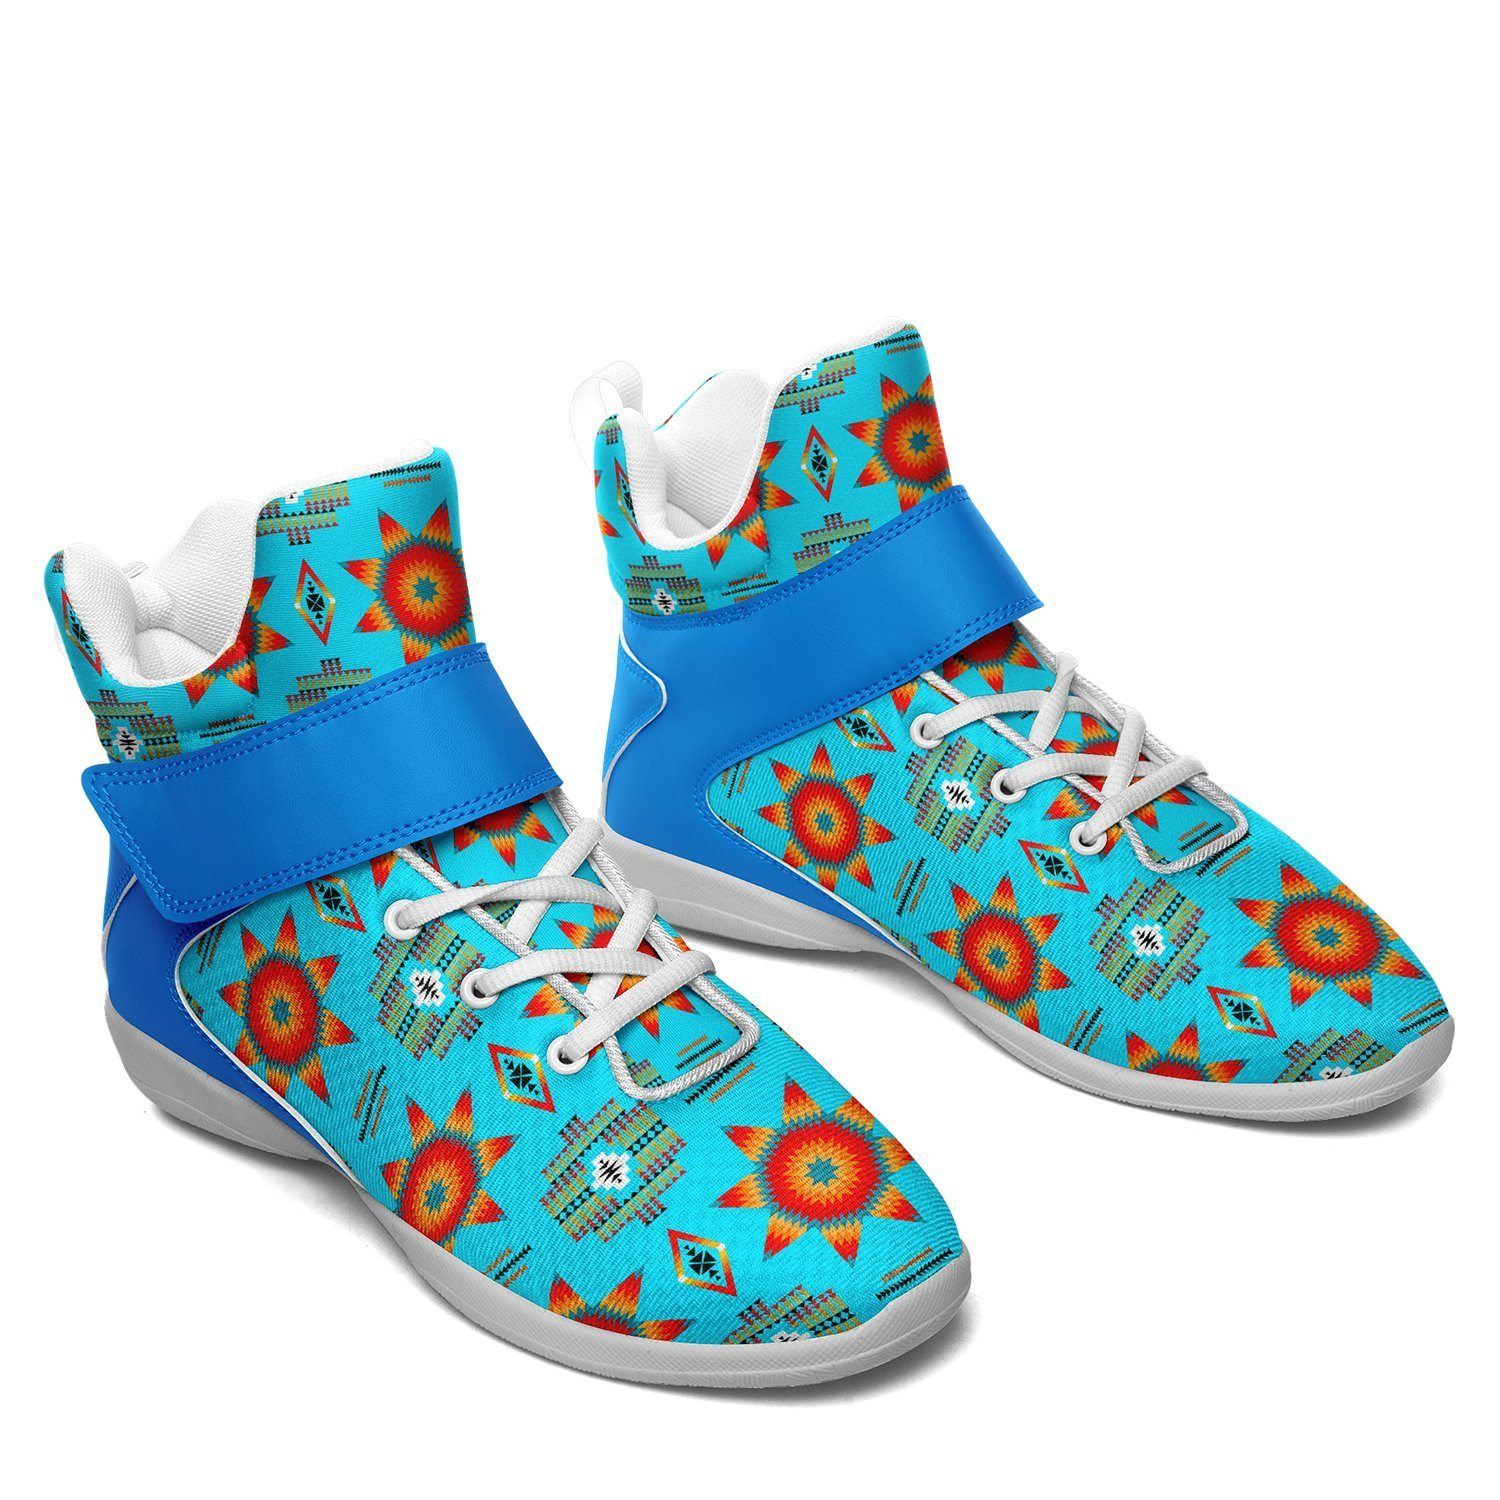 Rising Star Harvest Moon Ipottaa Basketball / Sport High Top Shoes - W